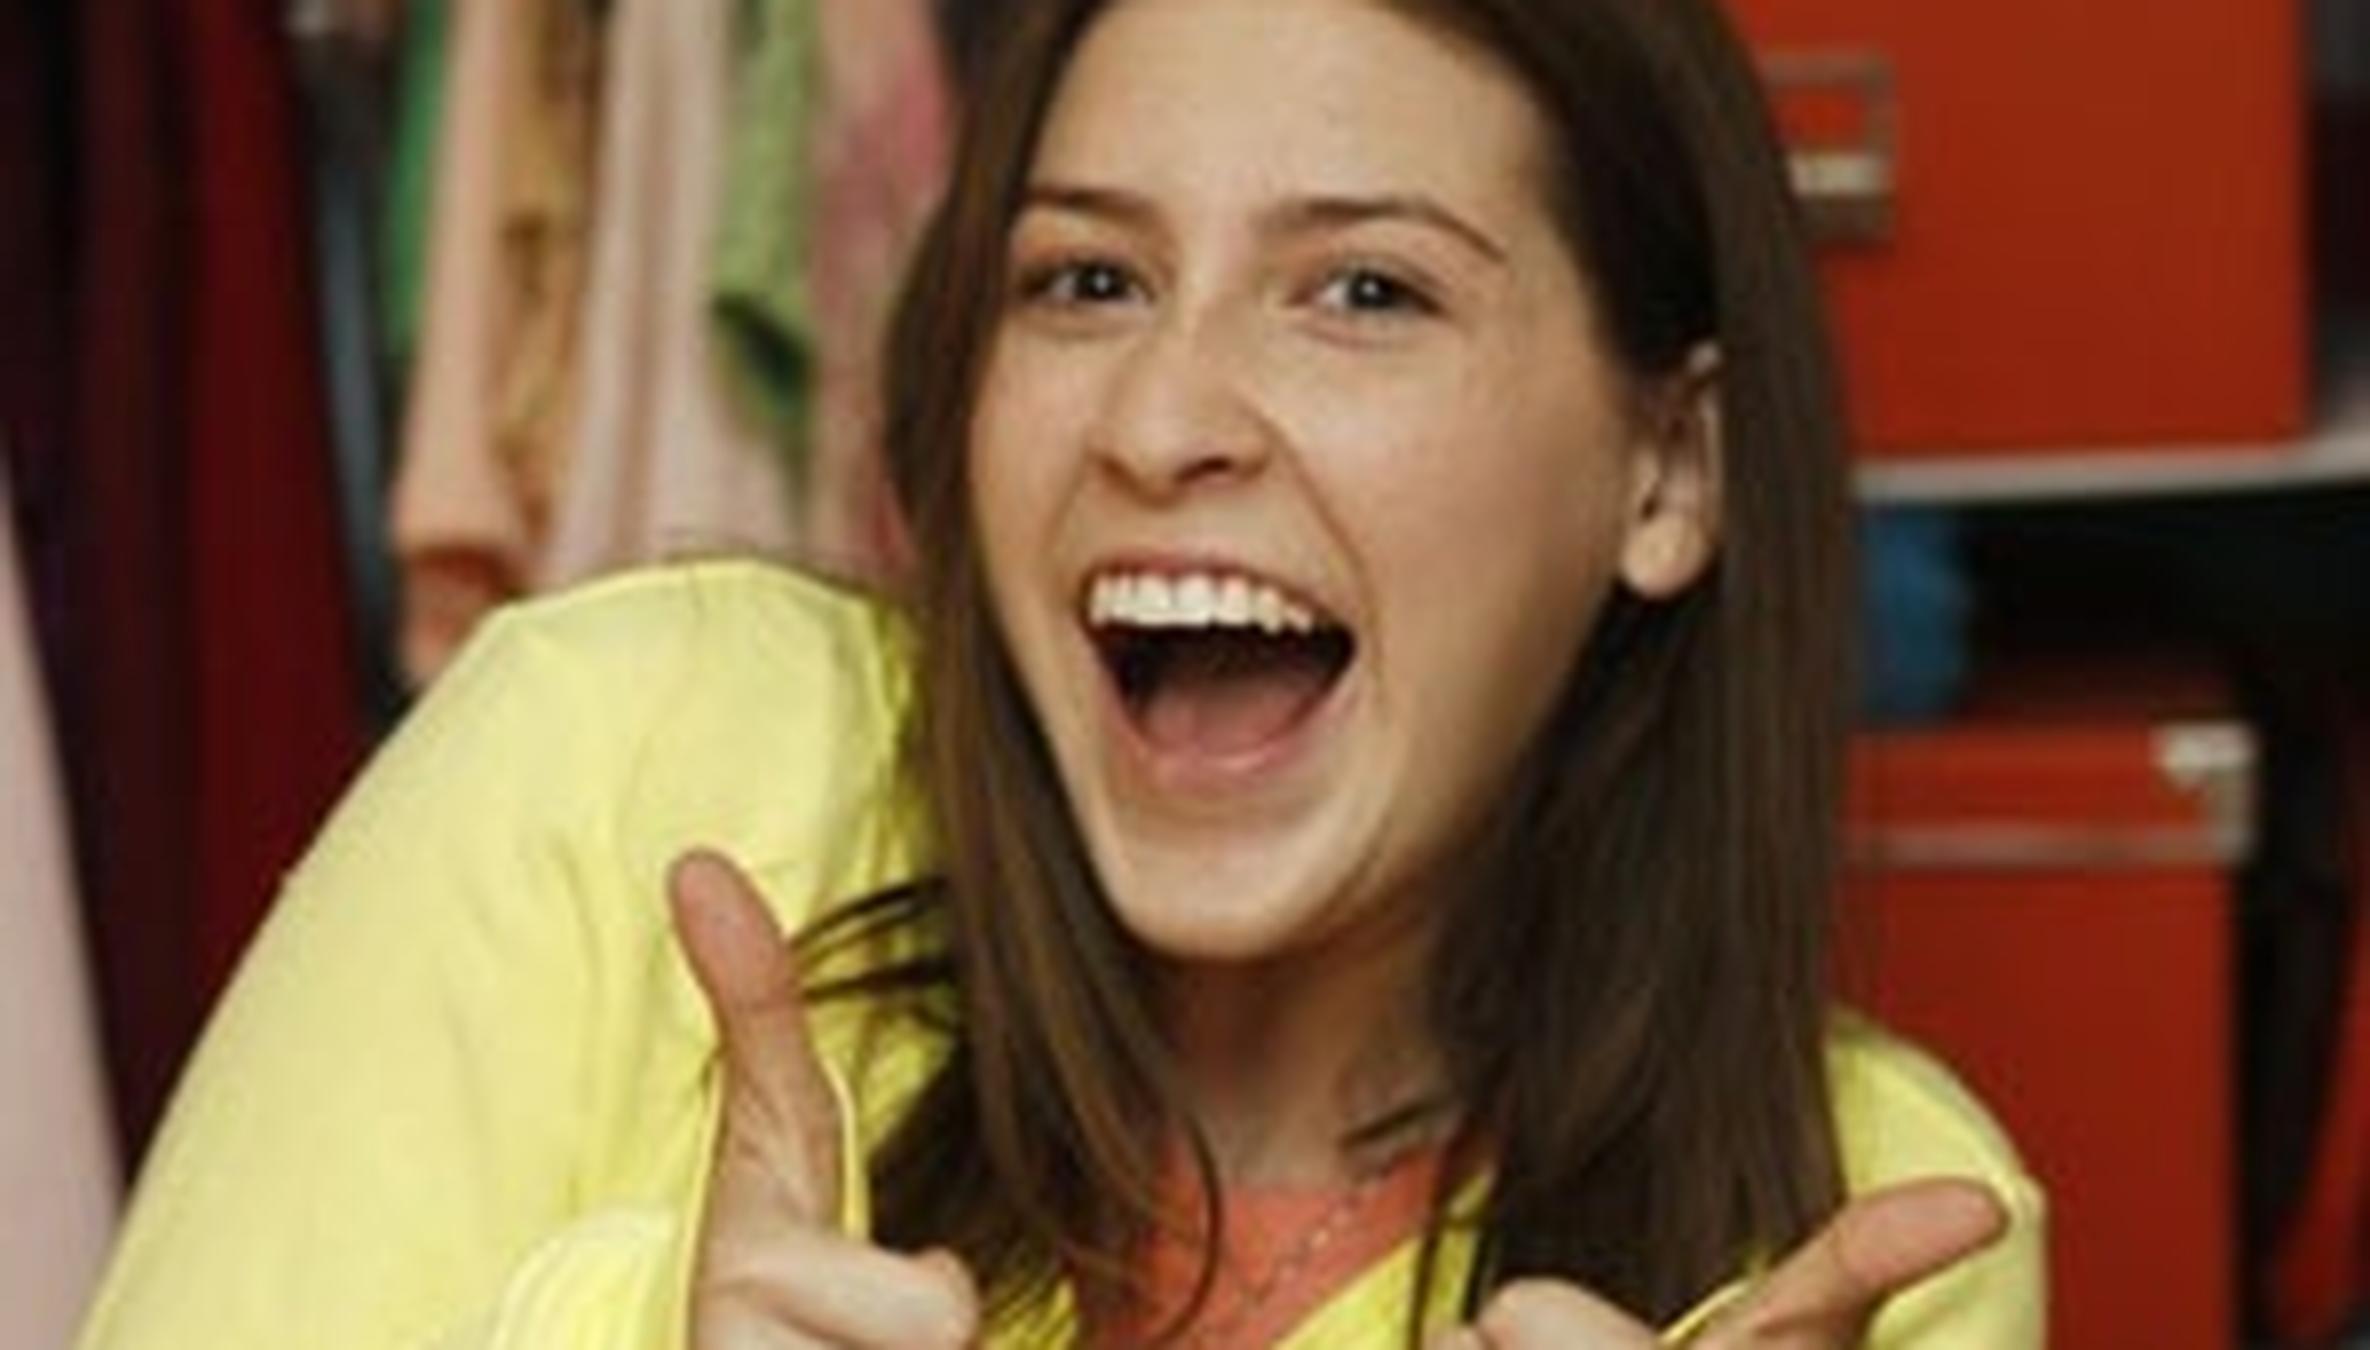 Eden Sher is the Girl in 'The Middle'